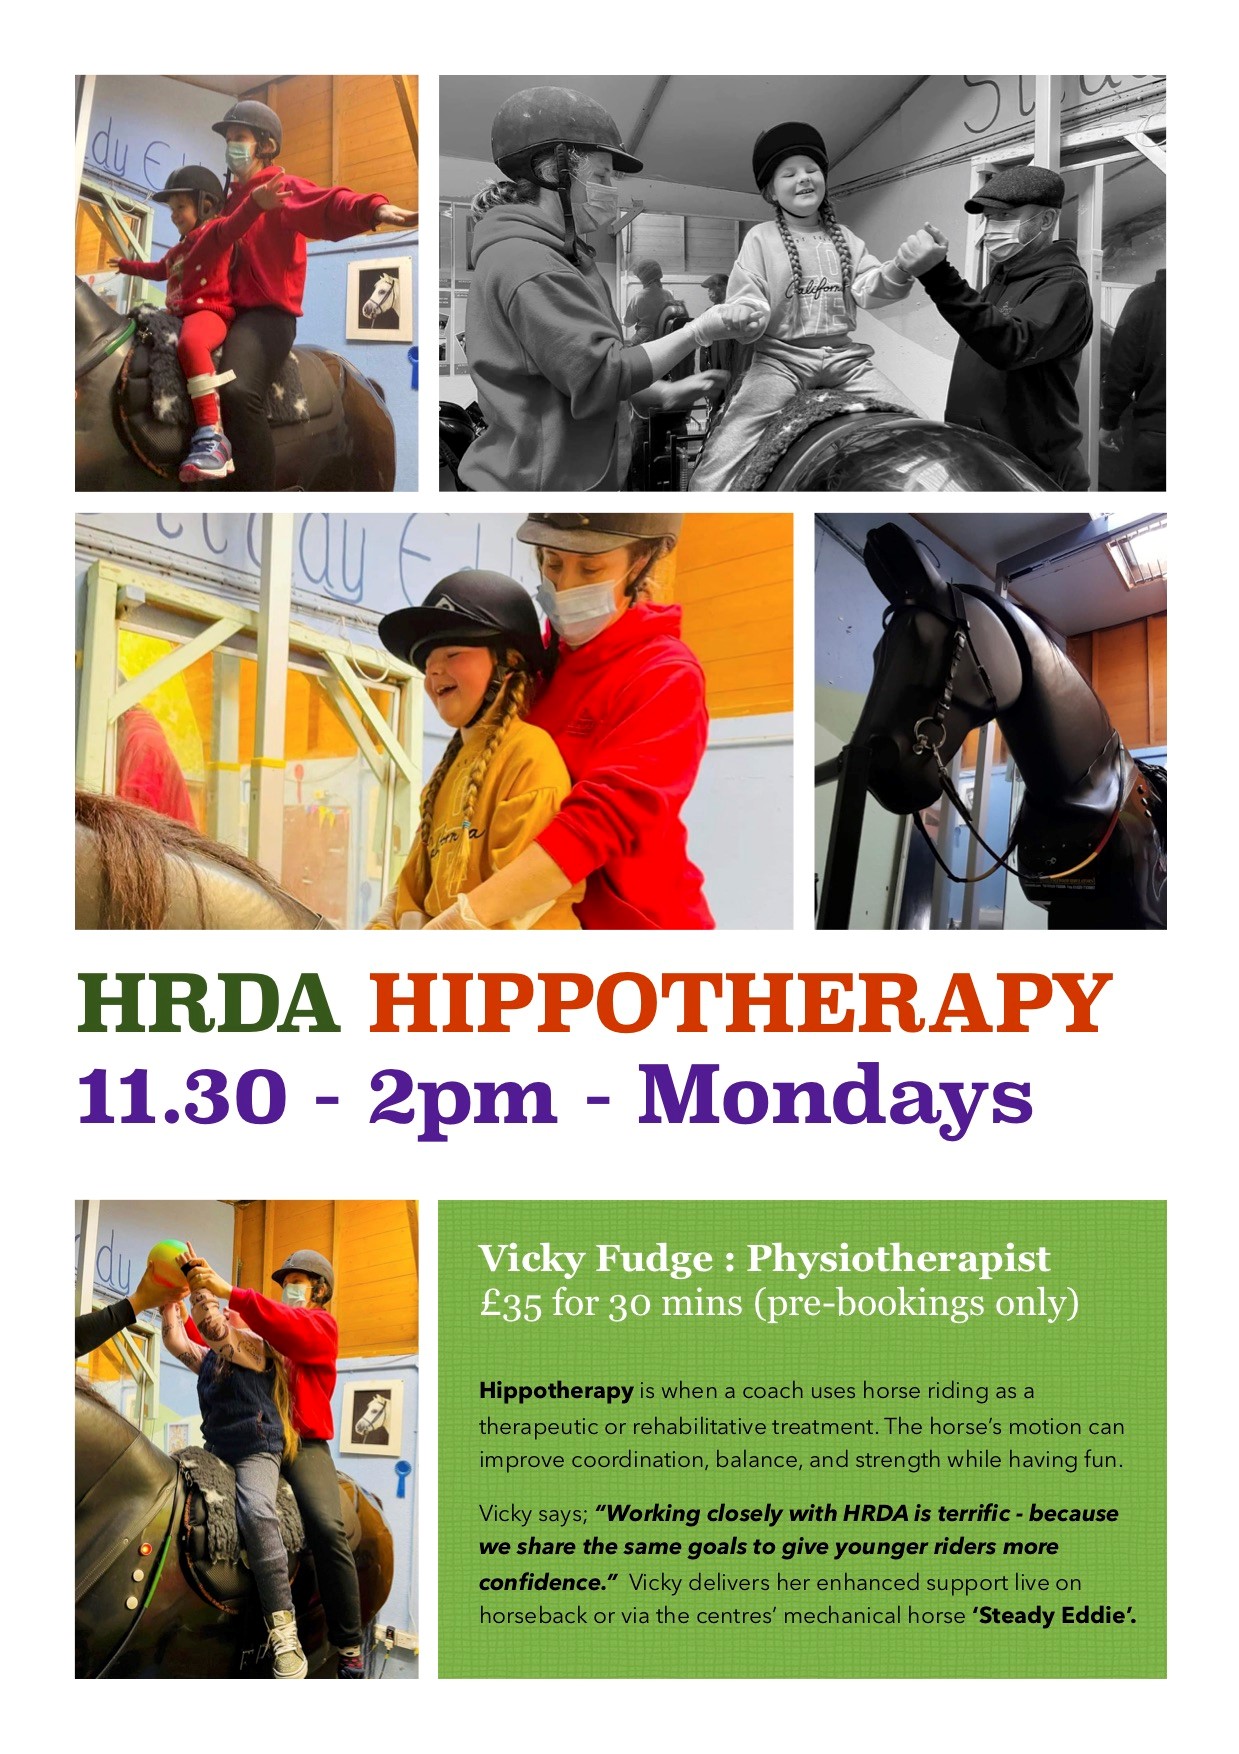 HIPPOTHERAPY RETURNS TO HRDA